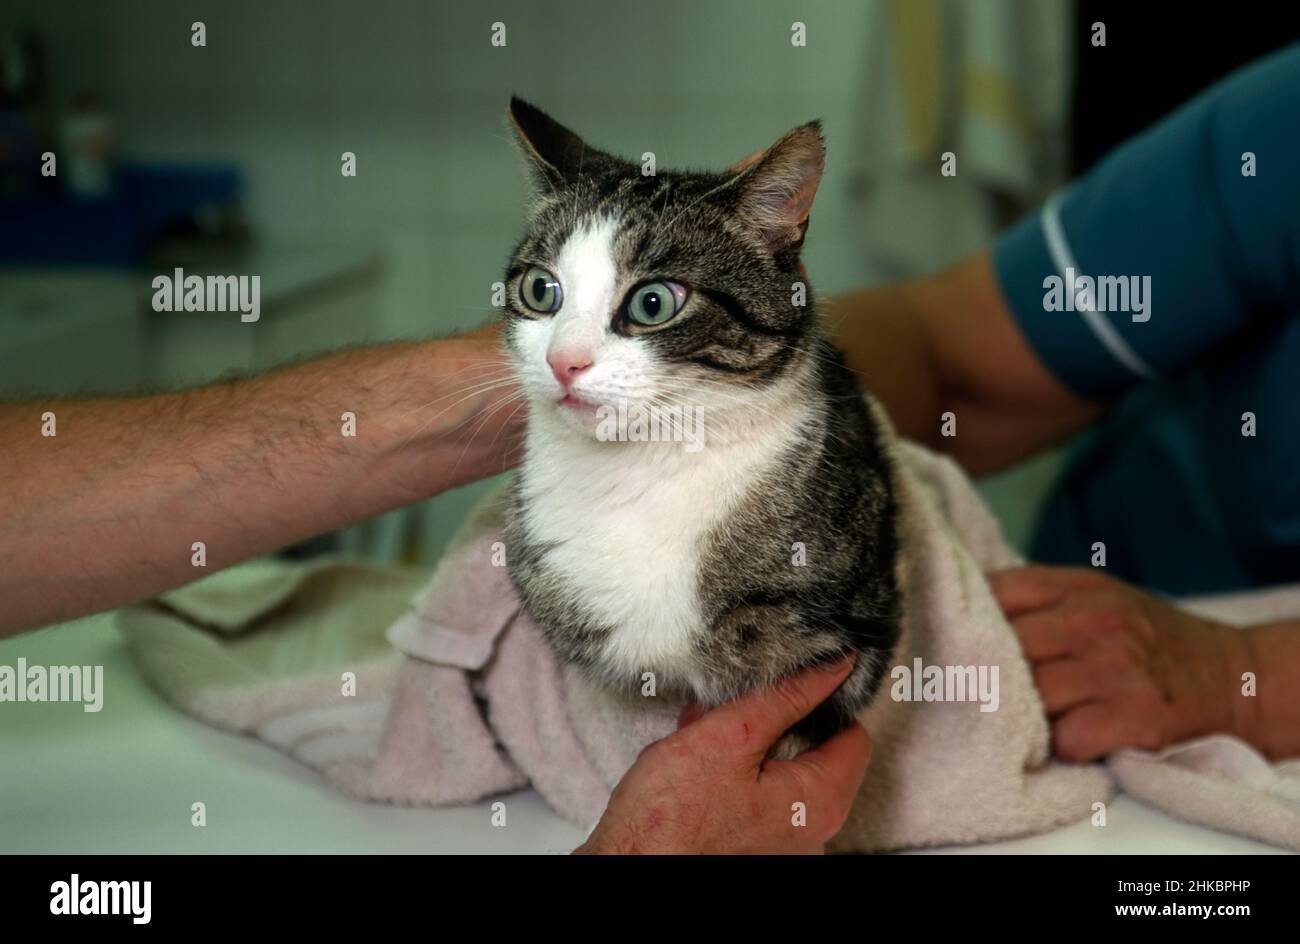 Cat being 'towelled' (to protect the vet) ahead of receiving an injection at a vet (Veterinary Surgeon) Stock Photo